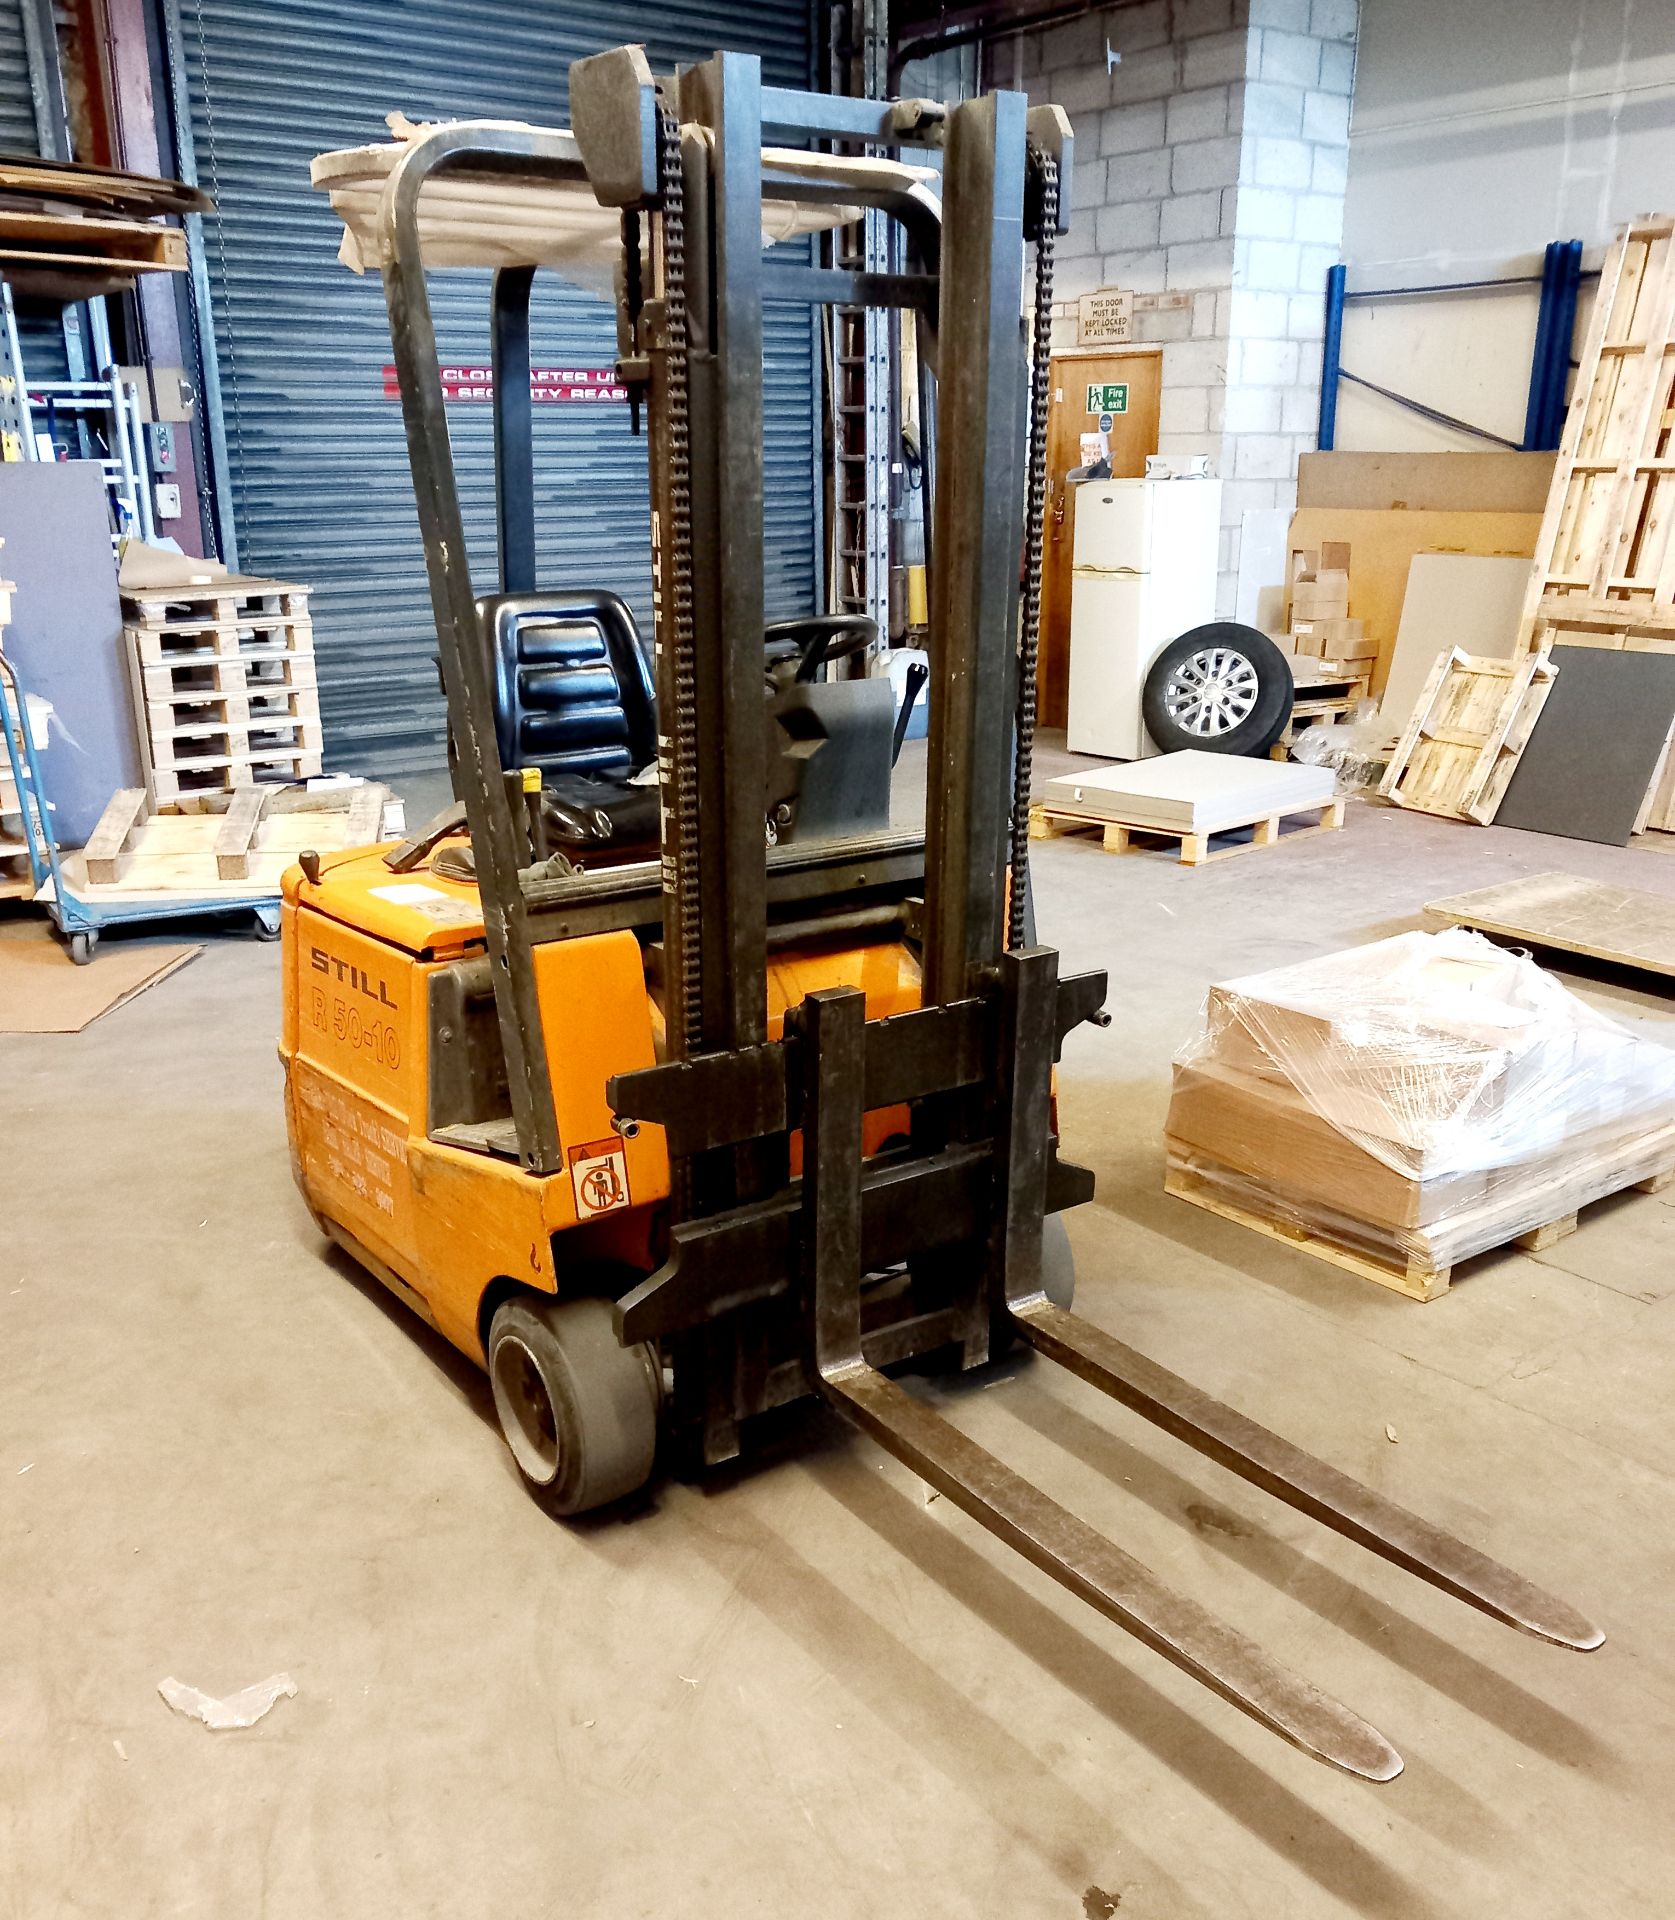 Still R50-10 3 Wheel Electric Forklift 1000kgs wit - Image 3 of 5